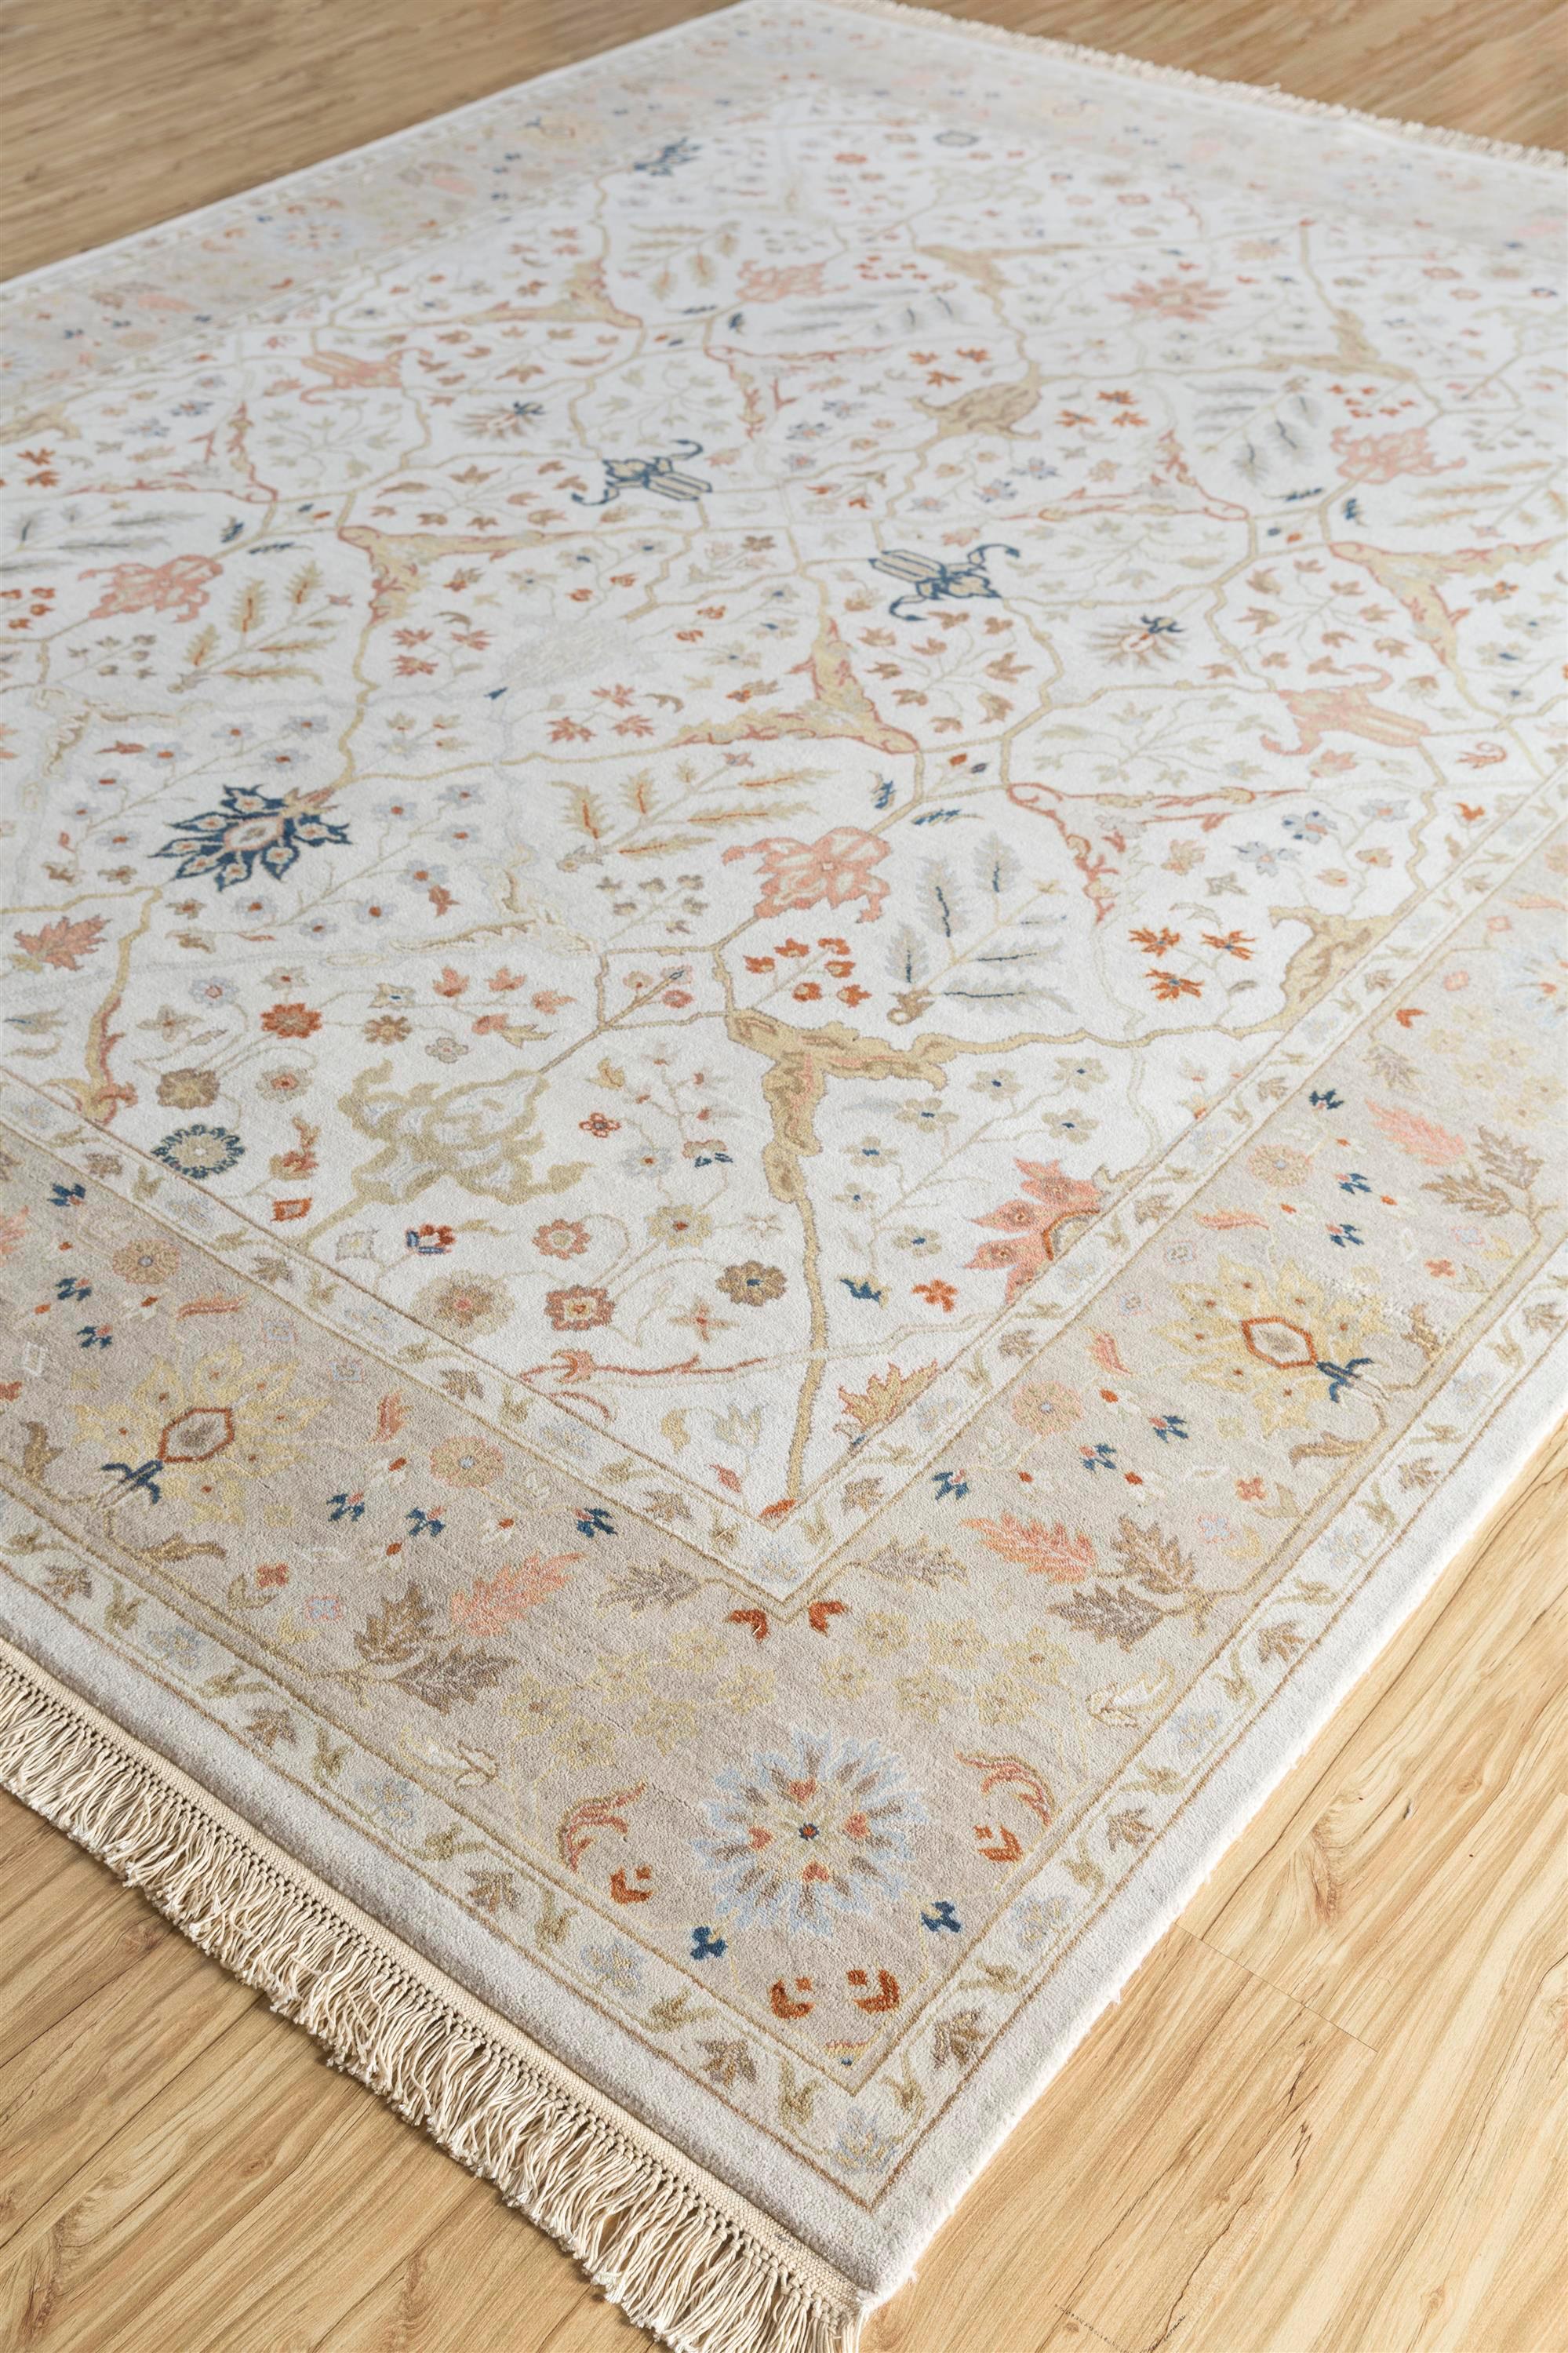 Indian Flora Fantasia White & Silky Beige 300x420 cm Handknotted Rug For Sale